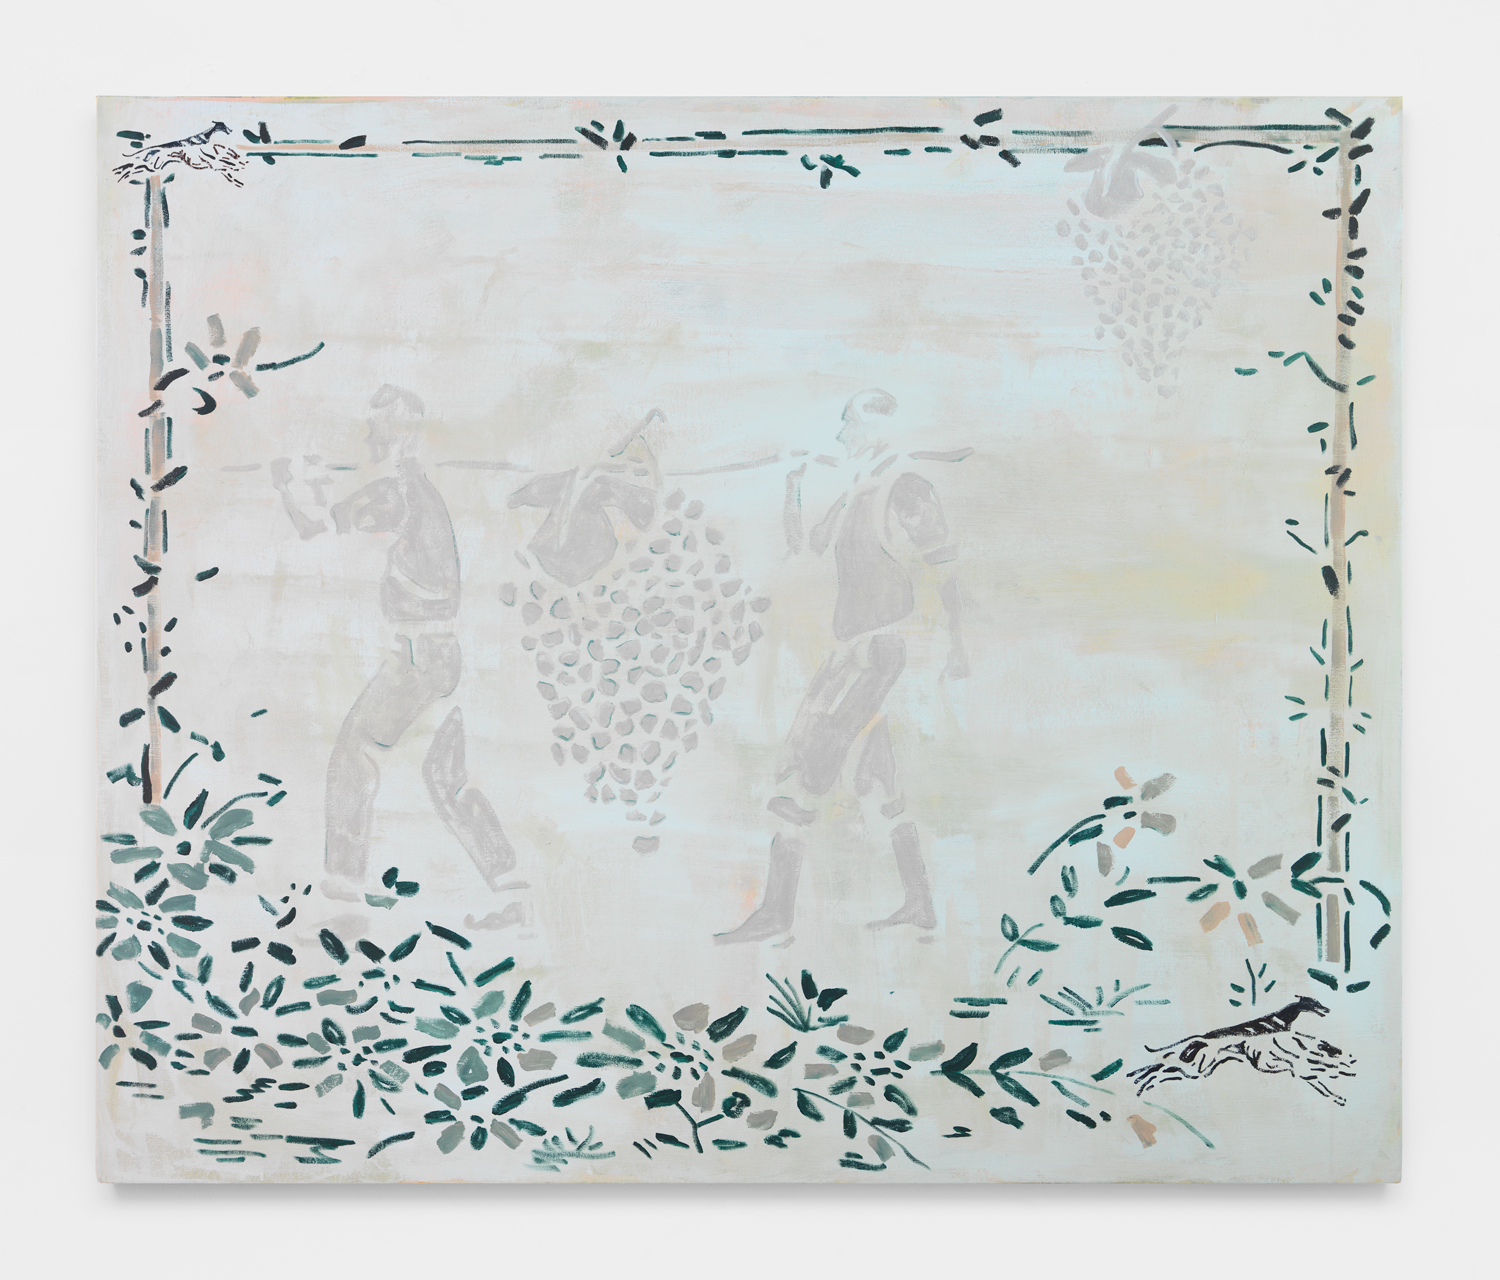 Zach Bruder, Epiphany, 2020, Acrylic and Flashe on linen, 50h x 60w in.